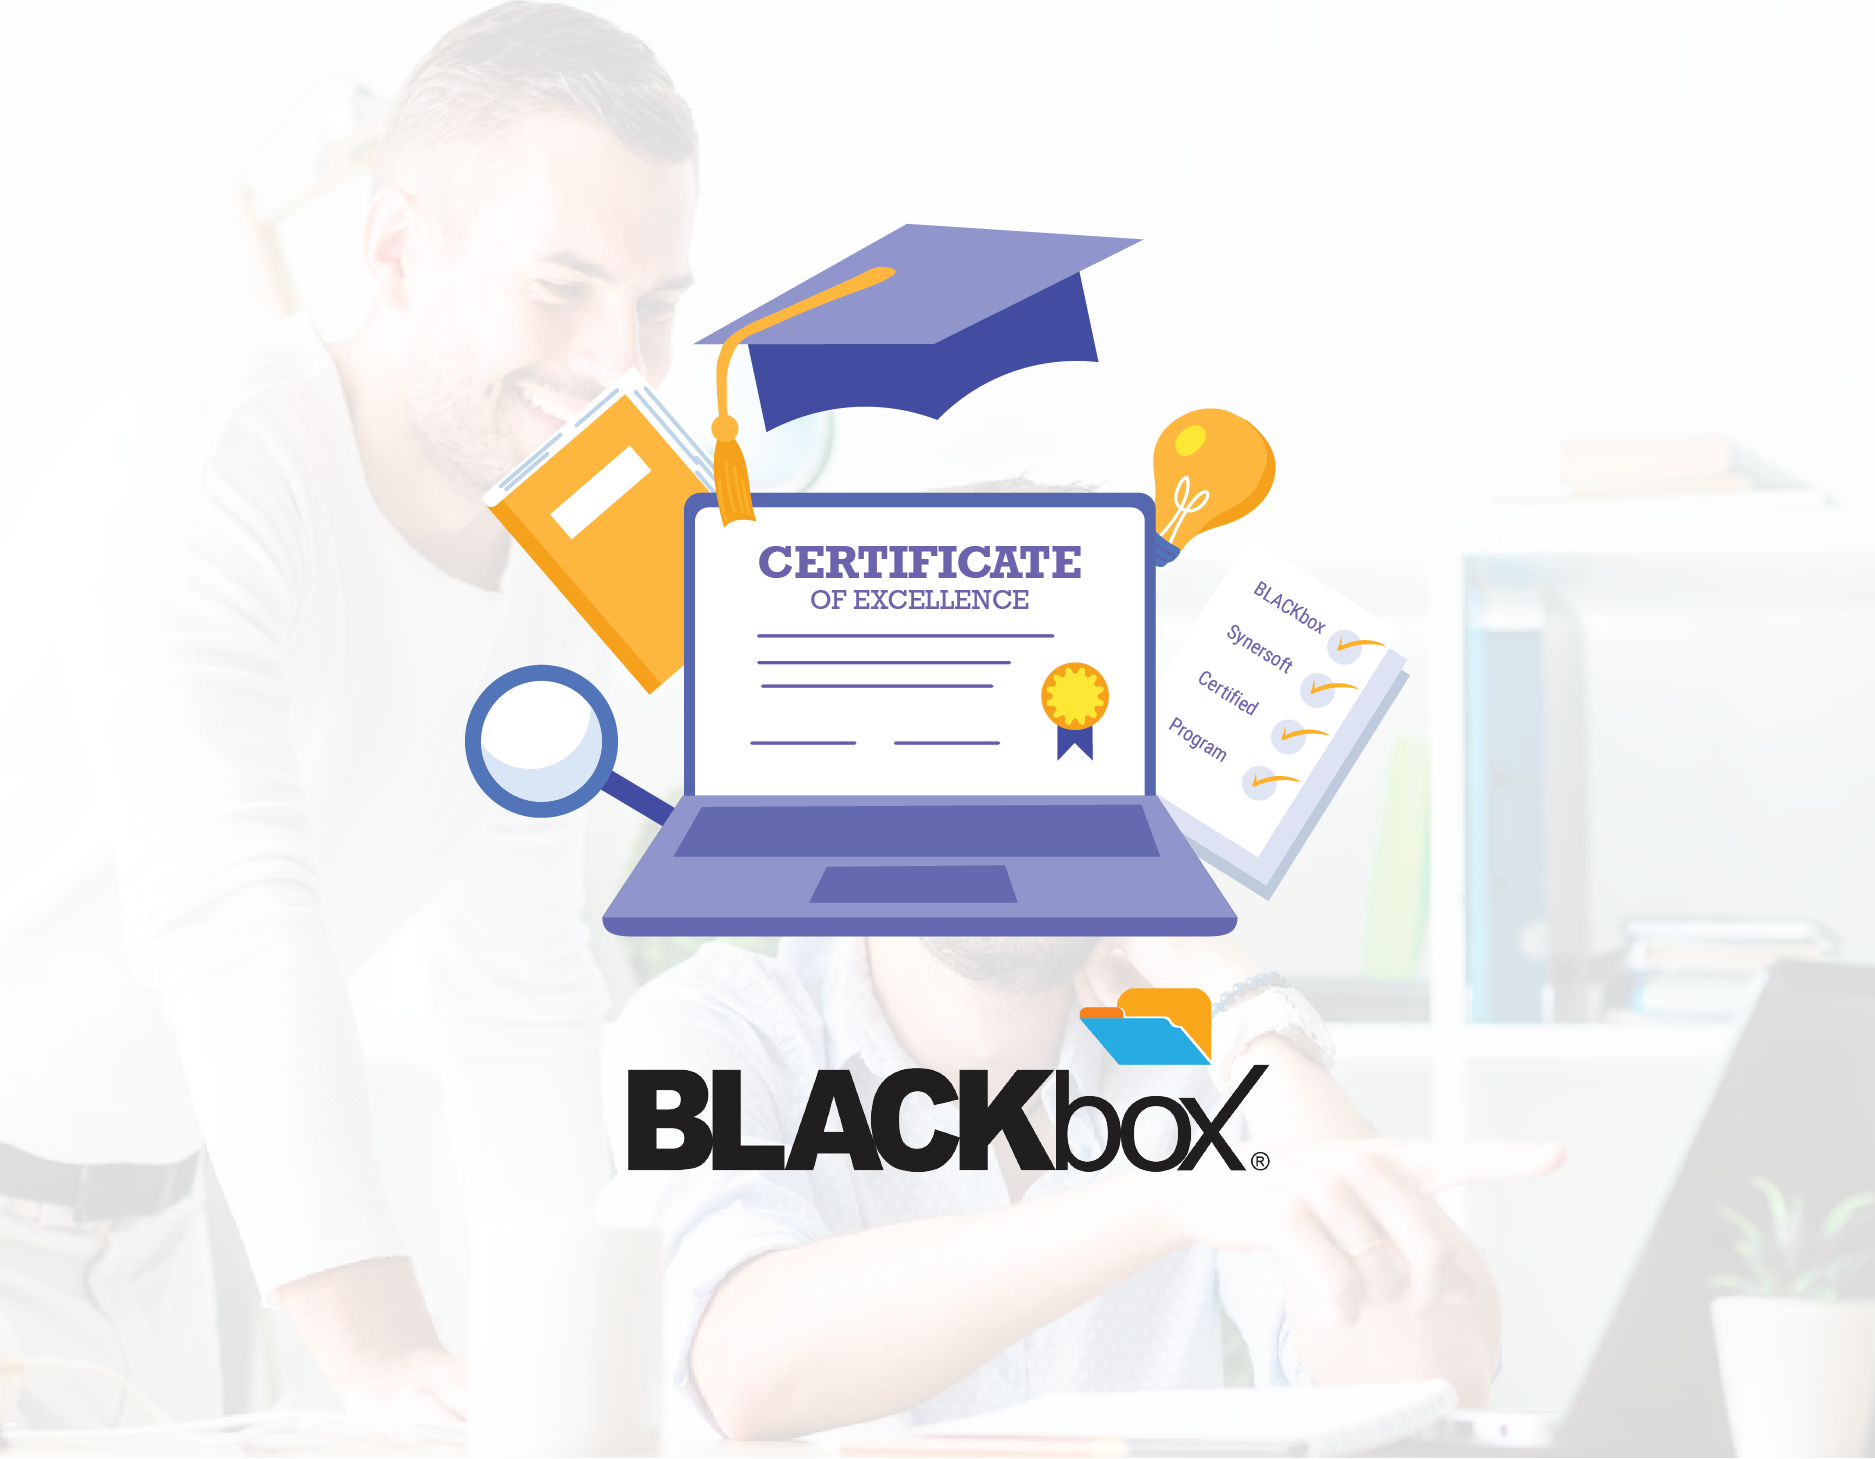 BLACKbox Certified Program: A smart career move for IT Aspirants and Professionals launched by BLACKbox Academy, Synersoft